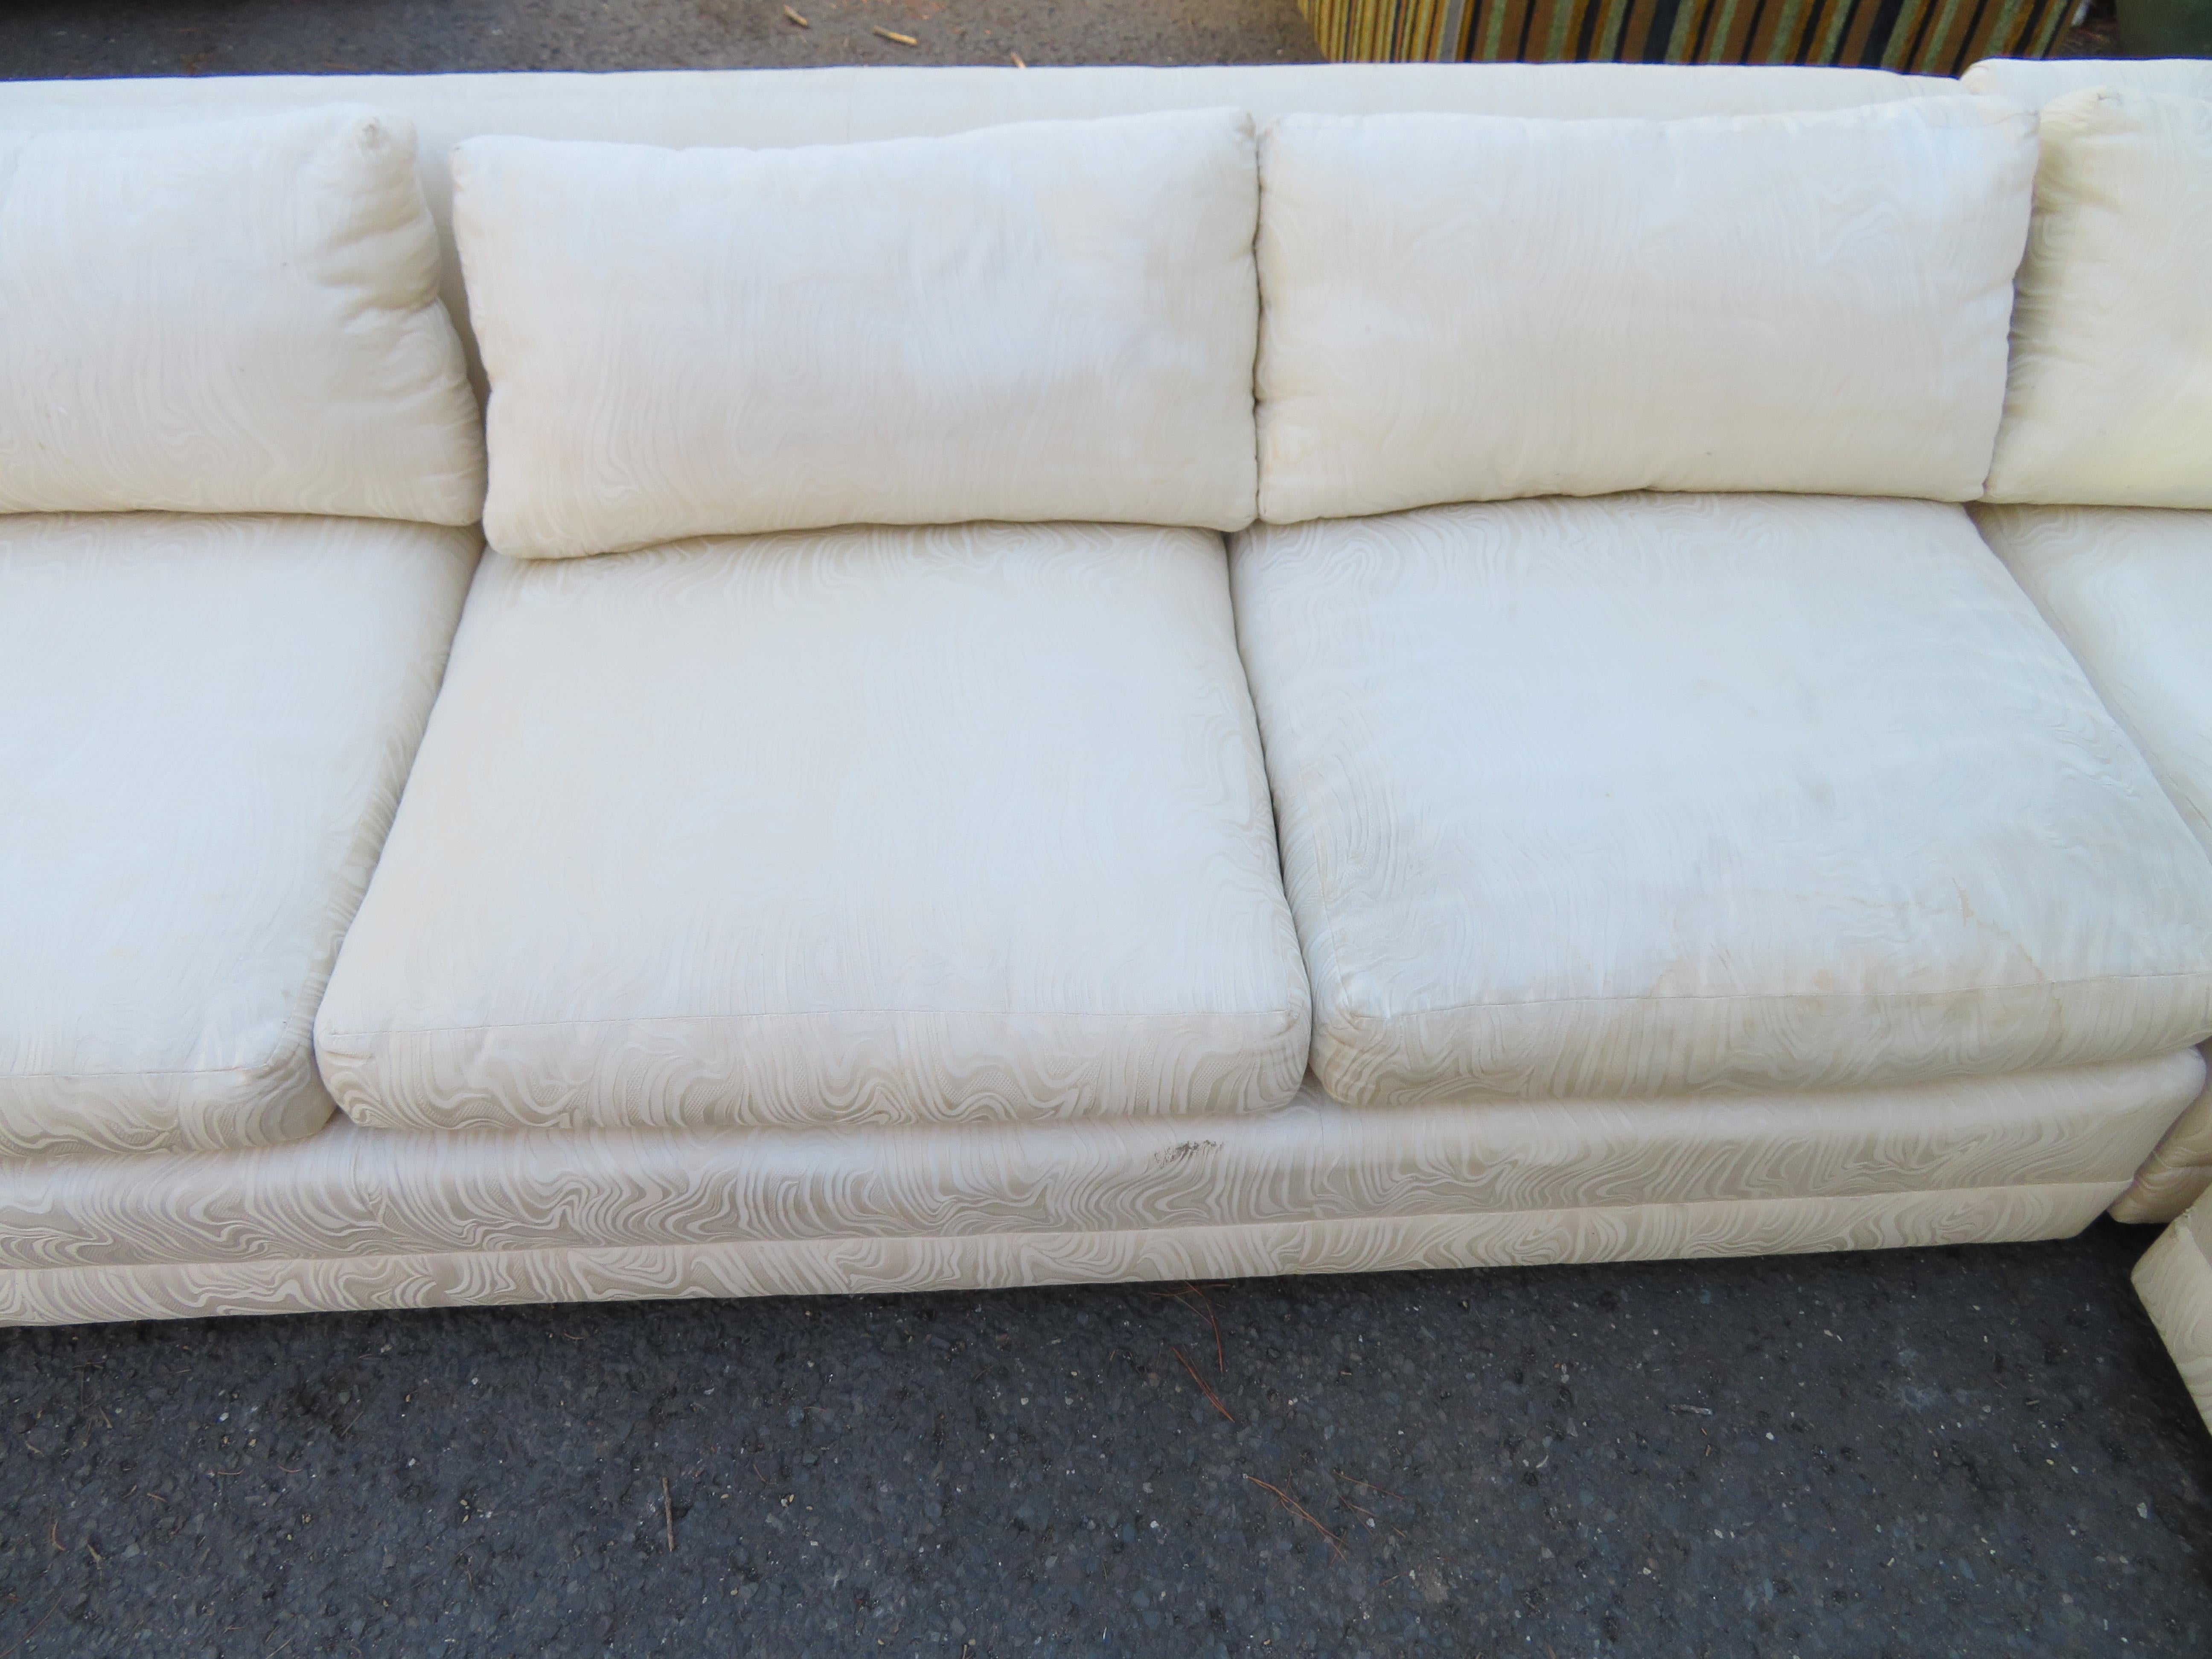 Handsome 6 Piece Milo Baughman Directional Sectional Sofa Mid-Century Modern In Good Condition In Pemberton, NJ